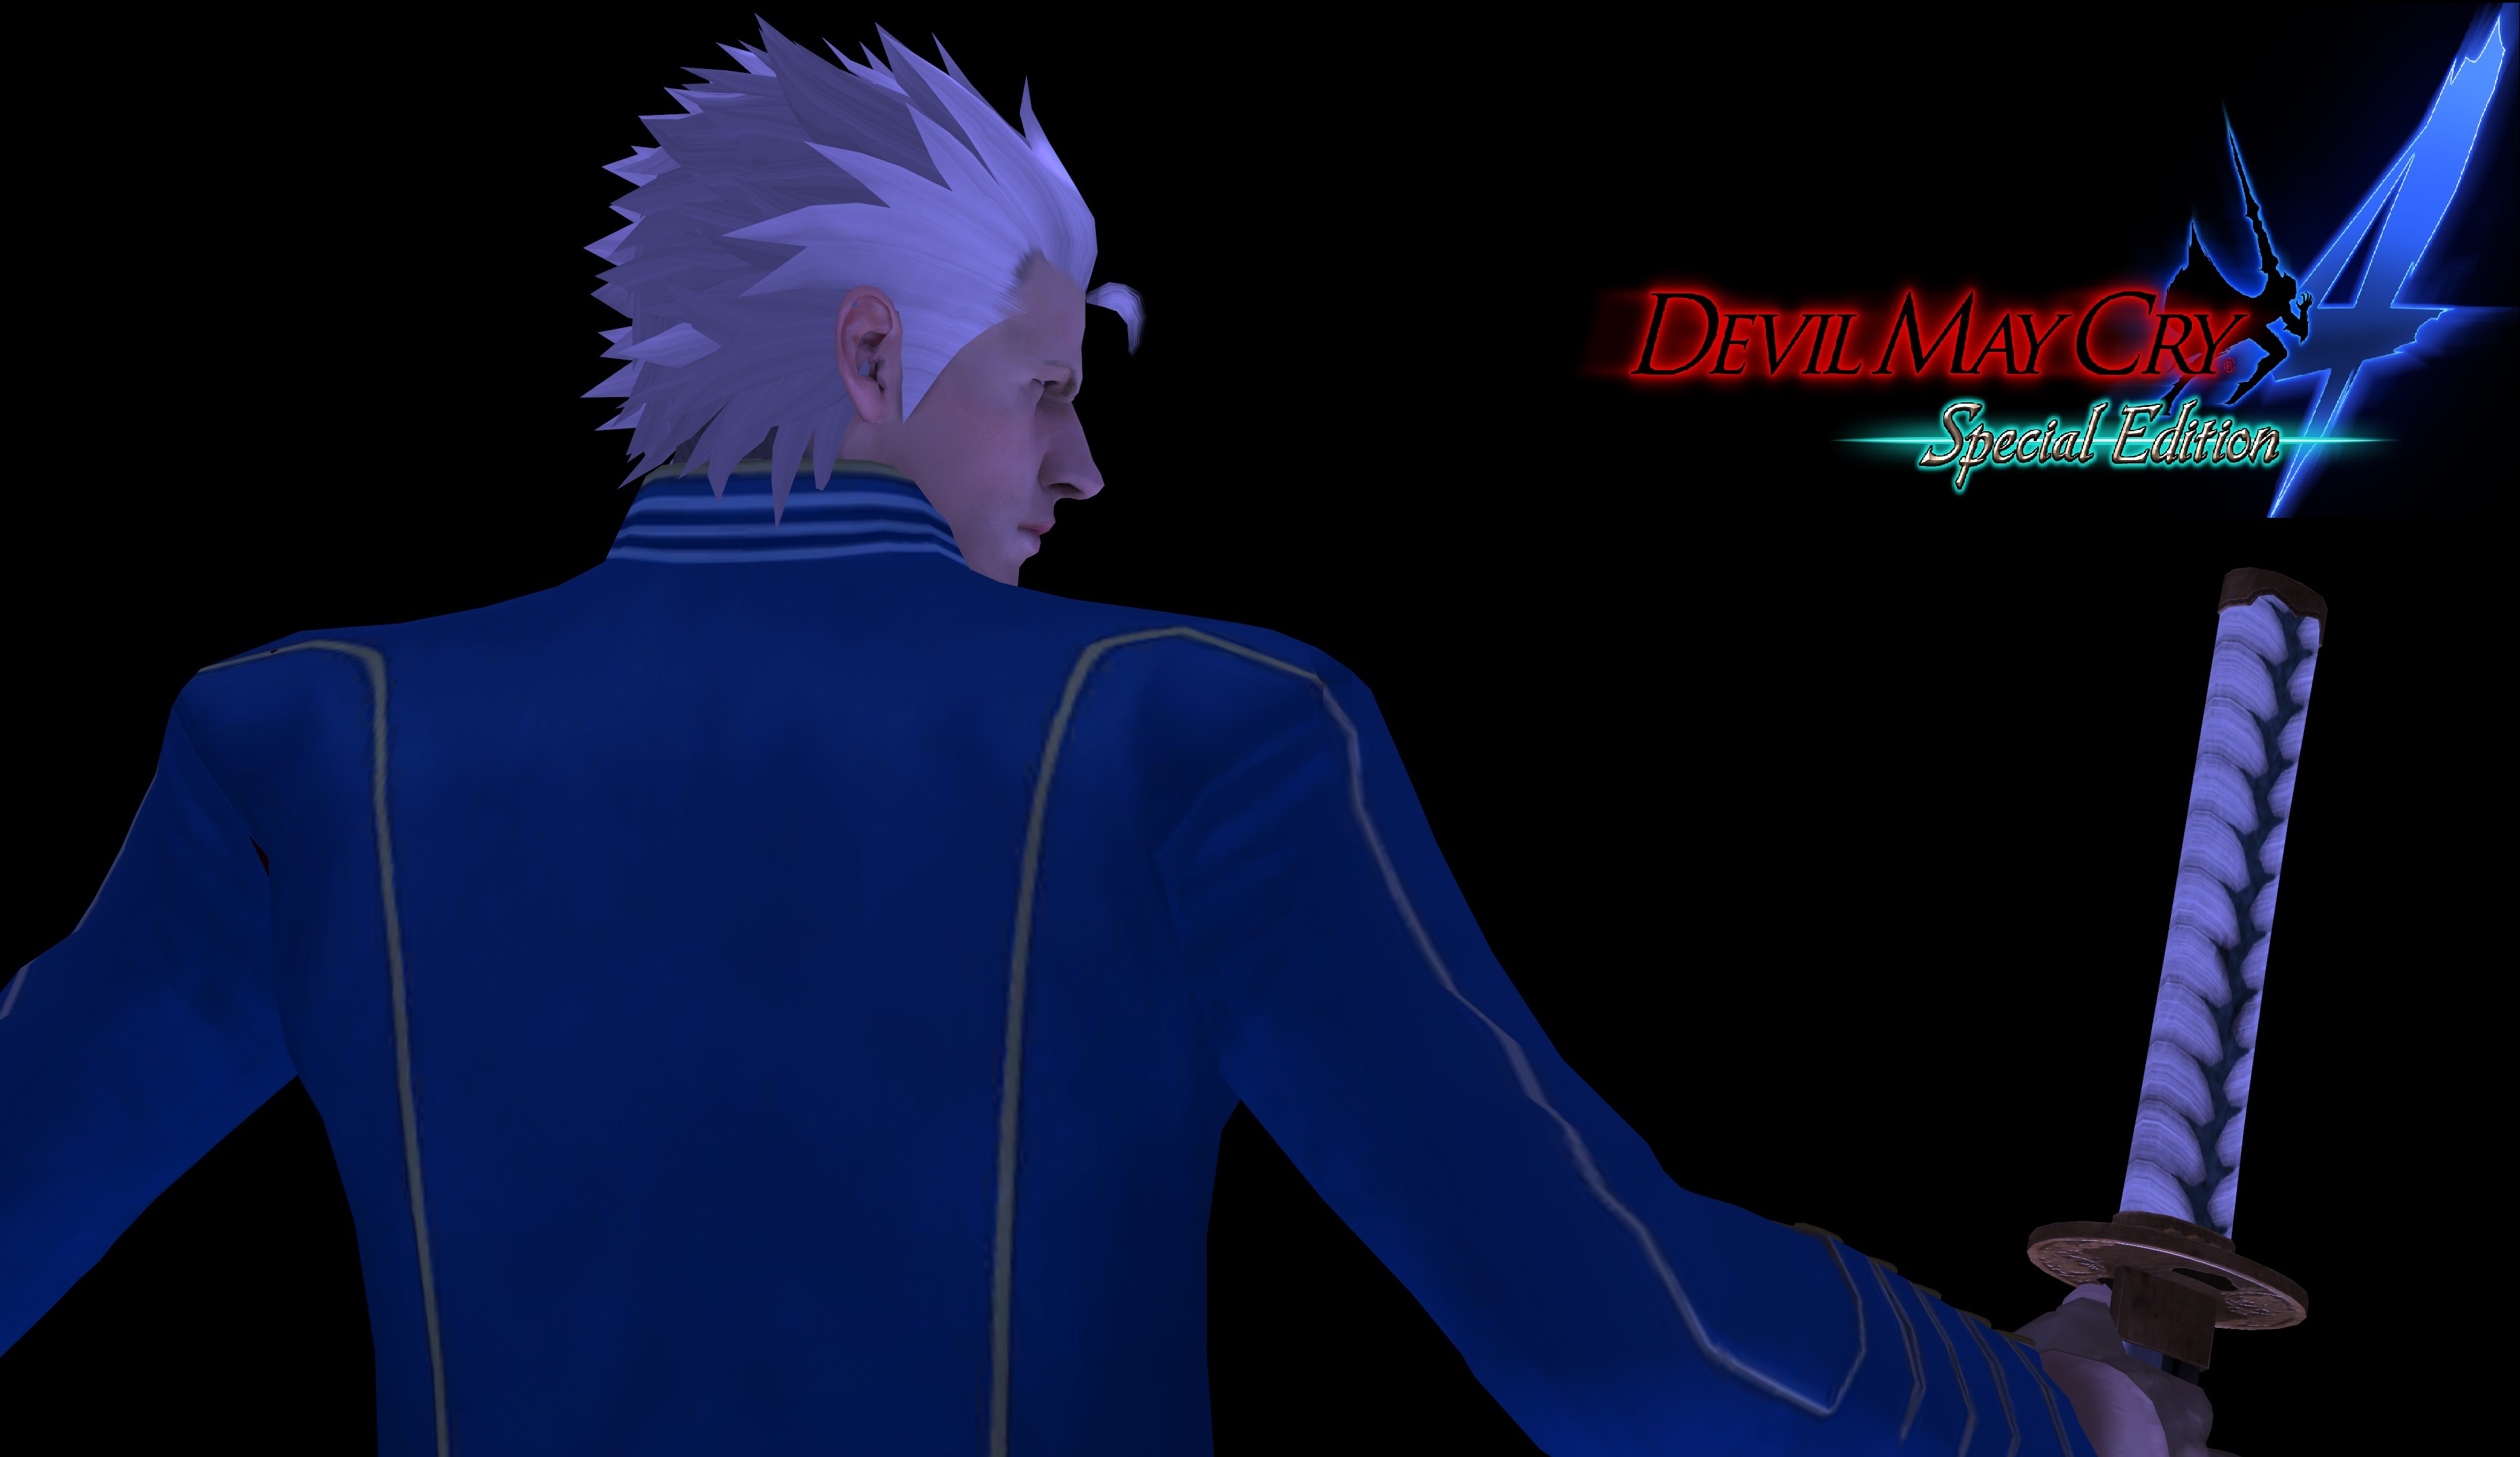 DMC3's Special Edition features Vergil as a playable character